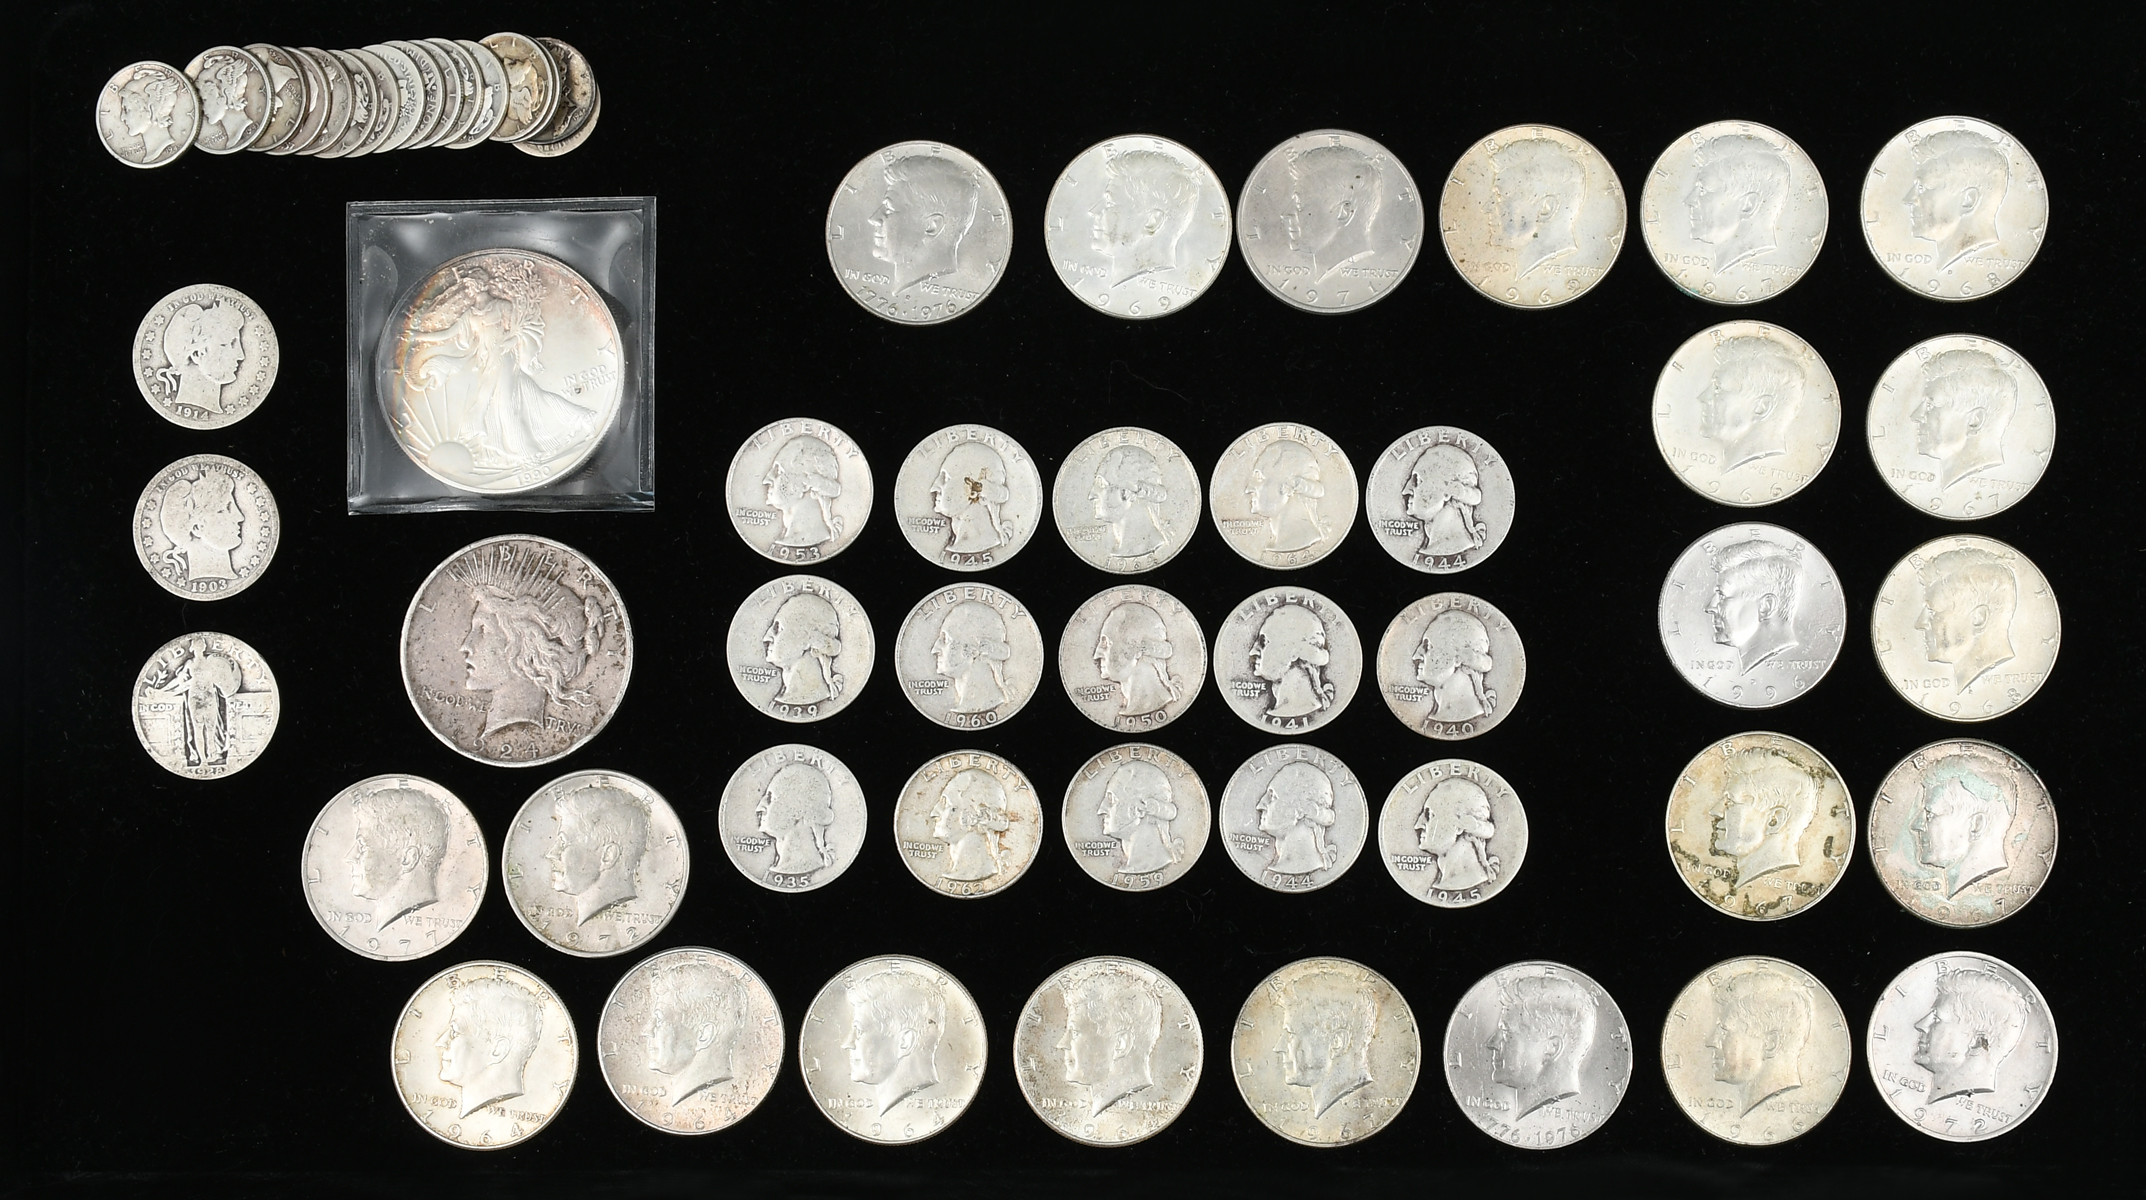 58 PC. U.S. MINT SILVER COIN COLLECTION: